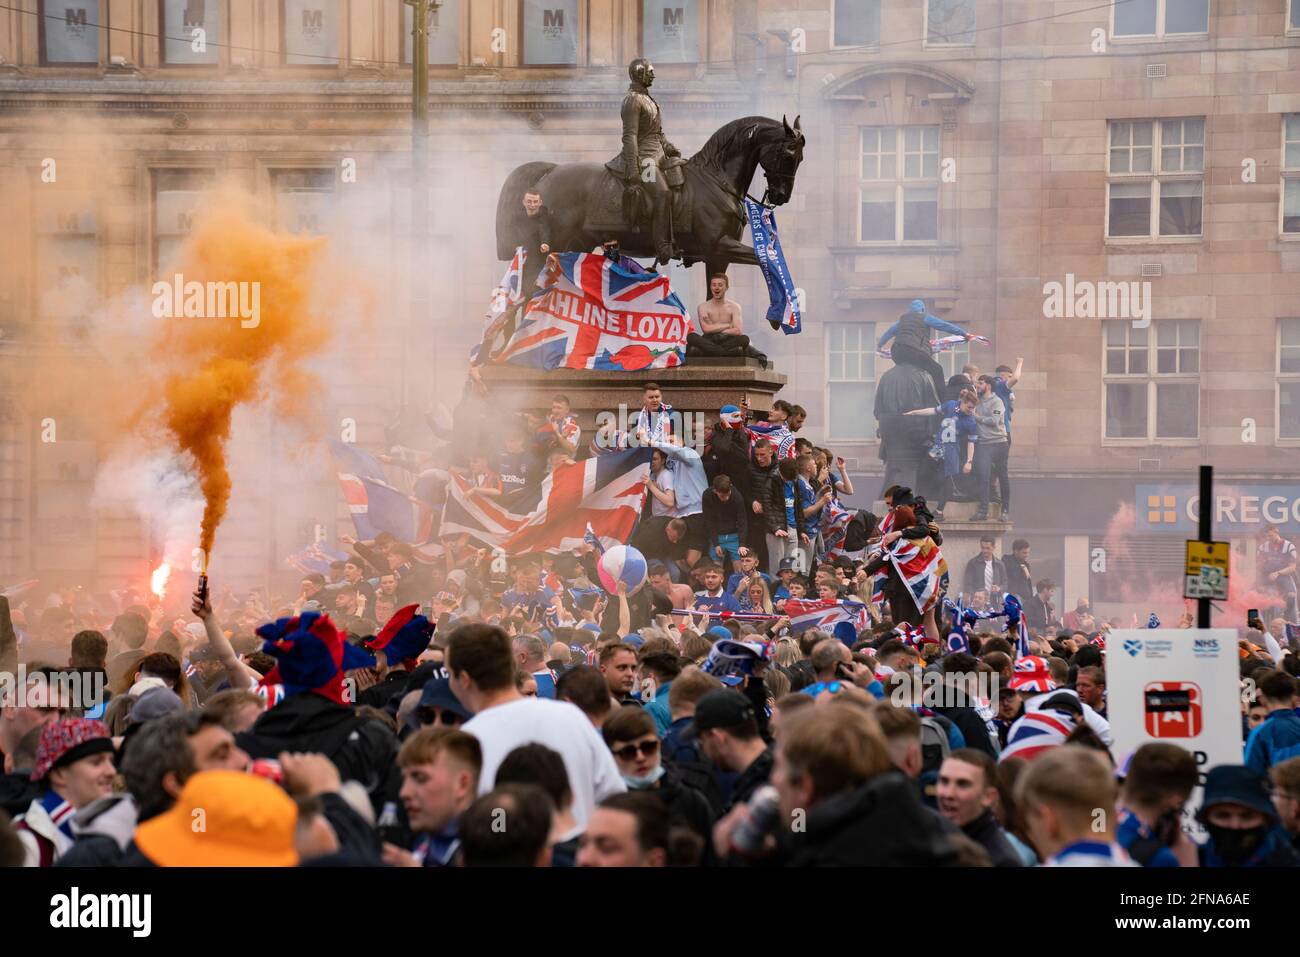 Glasgow, Scotland, UK. 15 May 2021. Thousands of supporters and fans of Rangers football club descend into George Square in Glasgow to celebrate winning the Scottish Premiership championship for the 55th time and the first time for 10 years.Iain Masterton/Alamy Live News Stock Photo